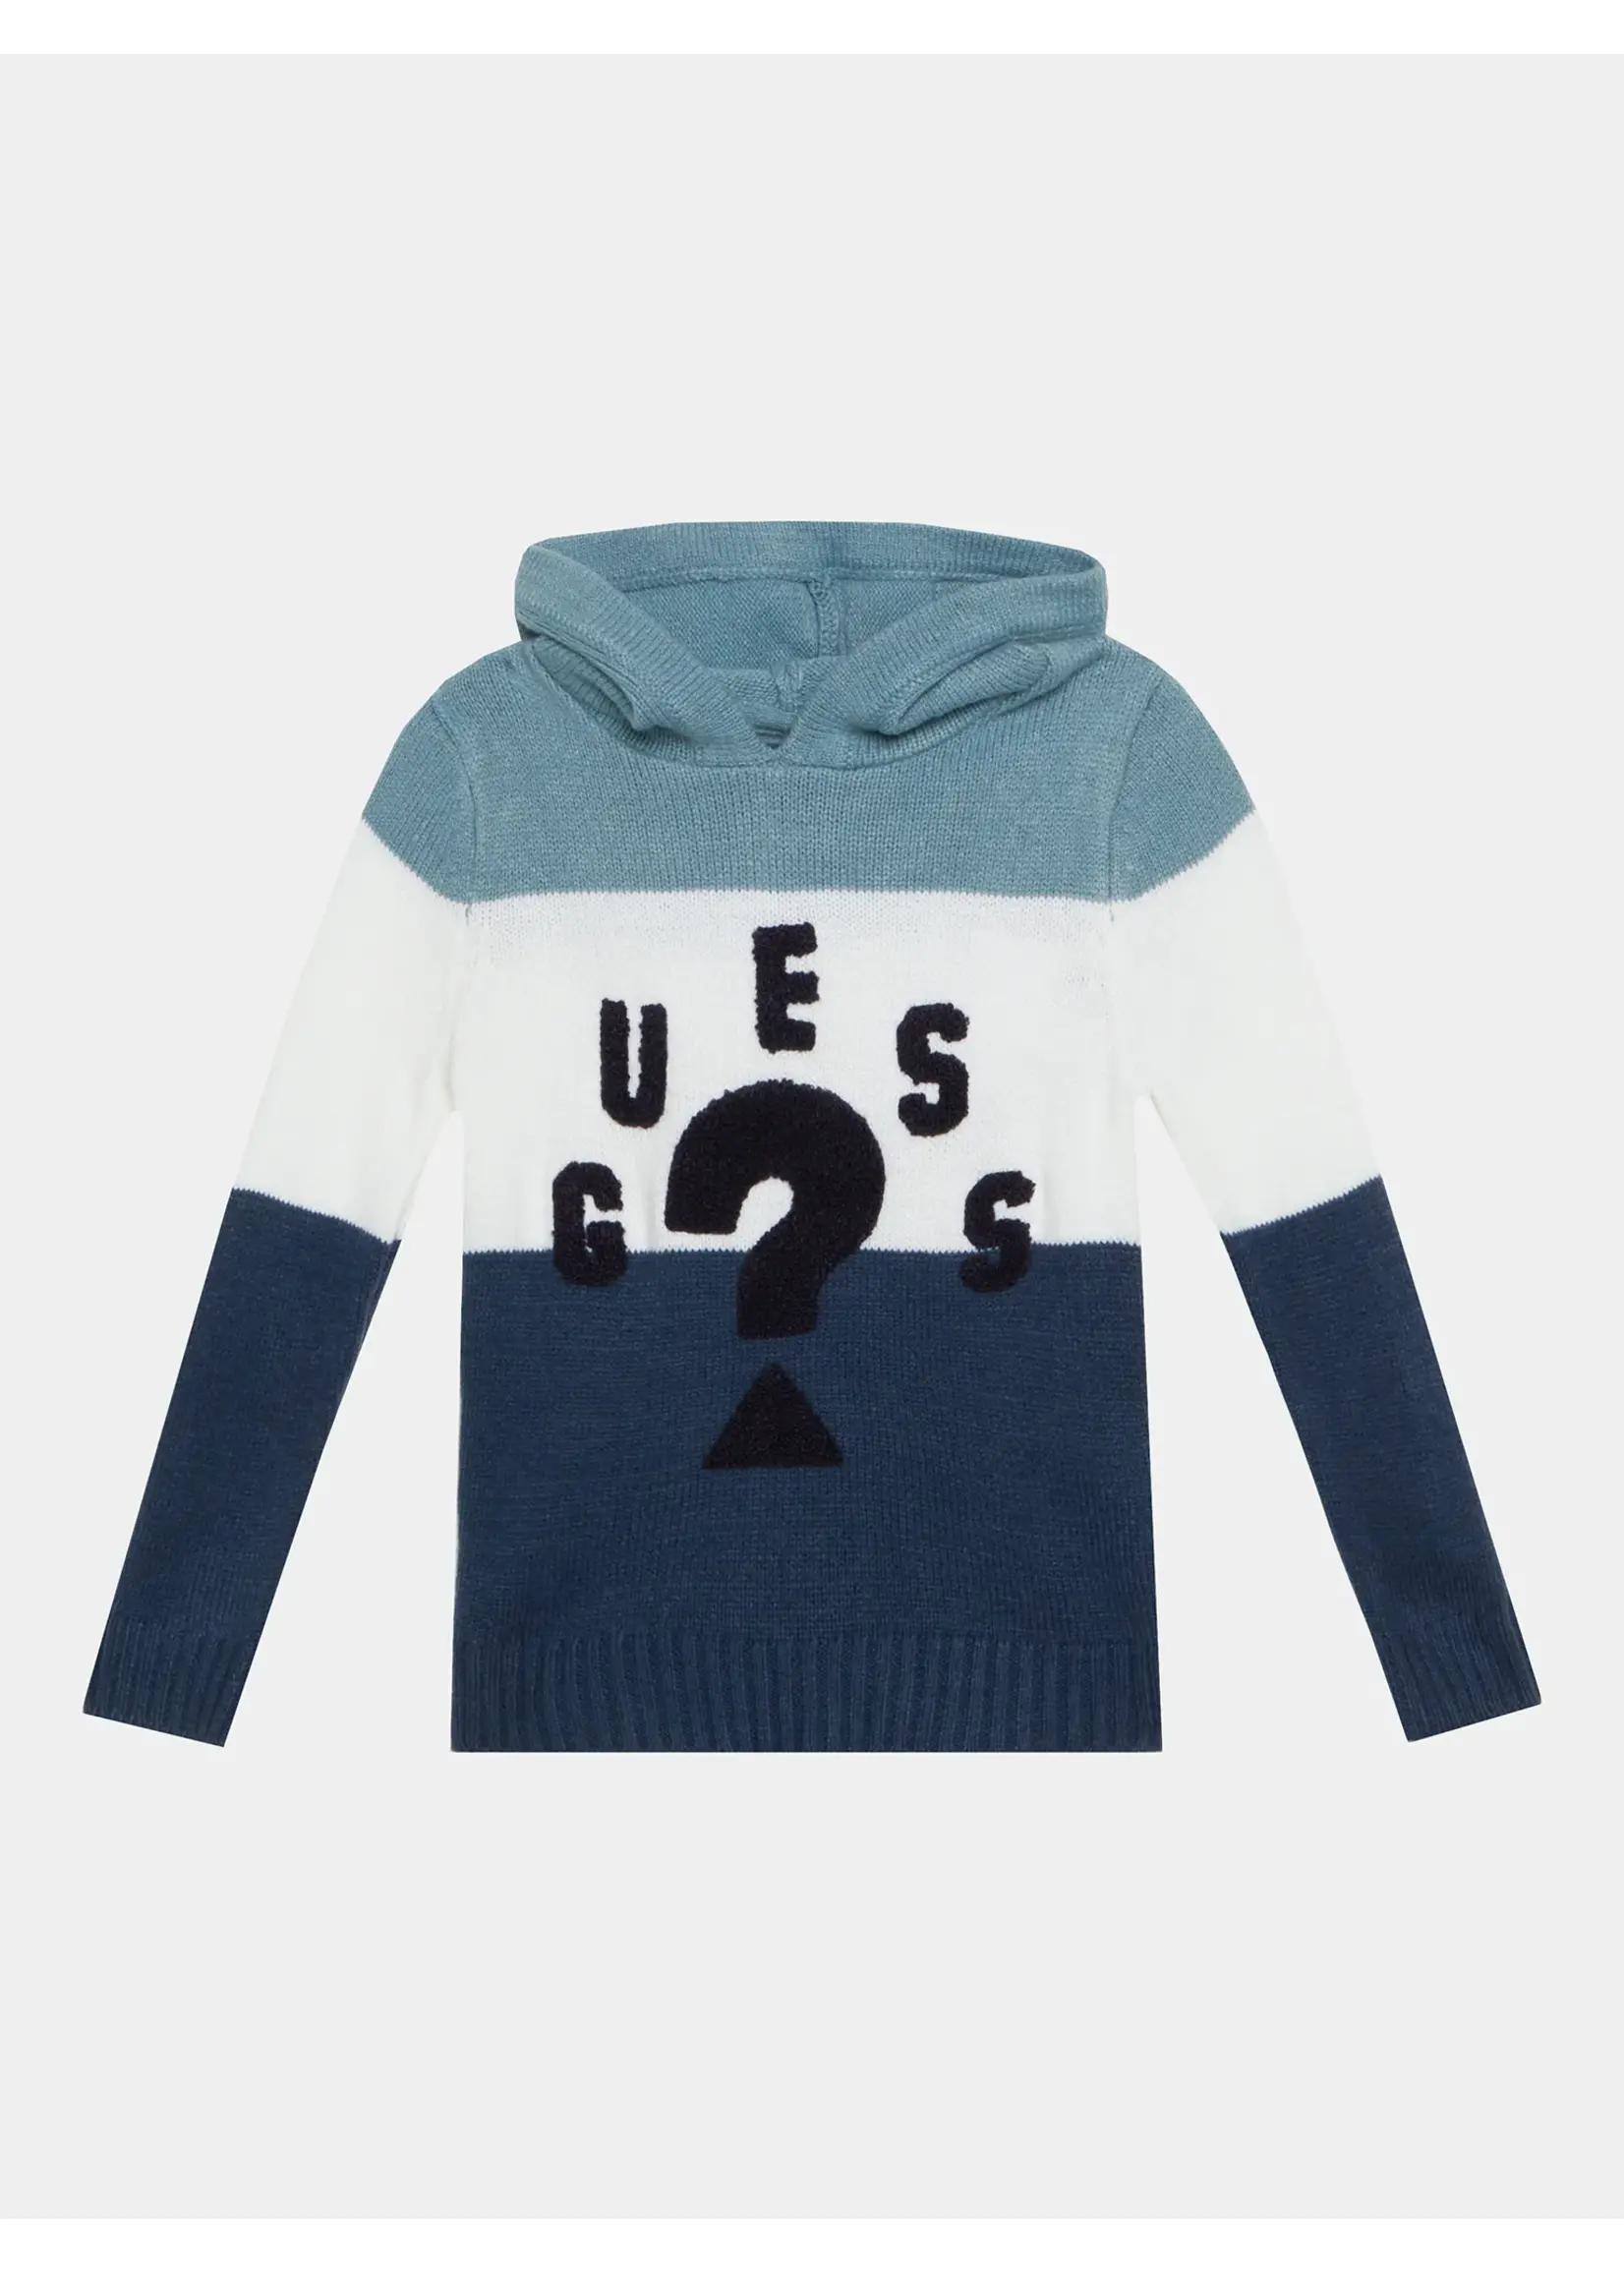 Guess COLORBLOCK HOODED SWEATER N3BR03 FR90 BLUE WHITE COMBO